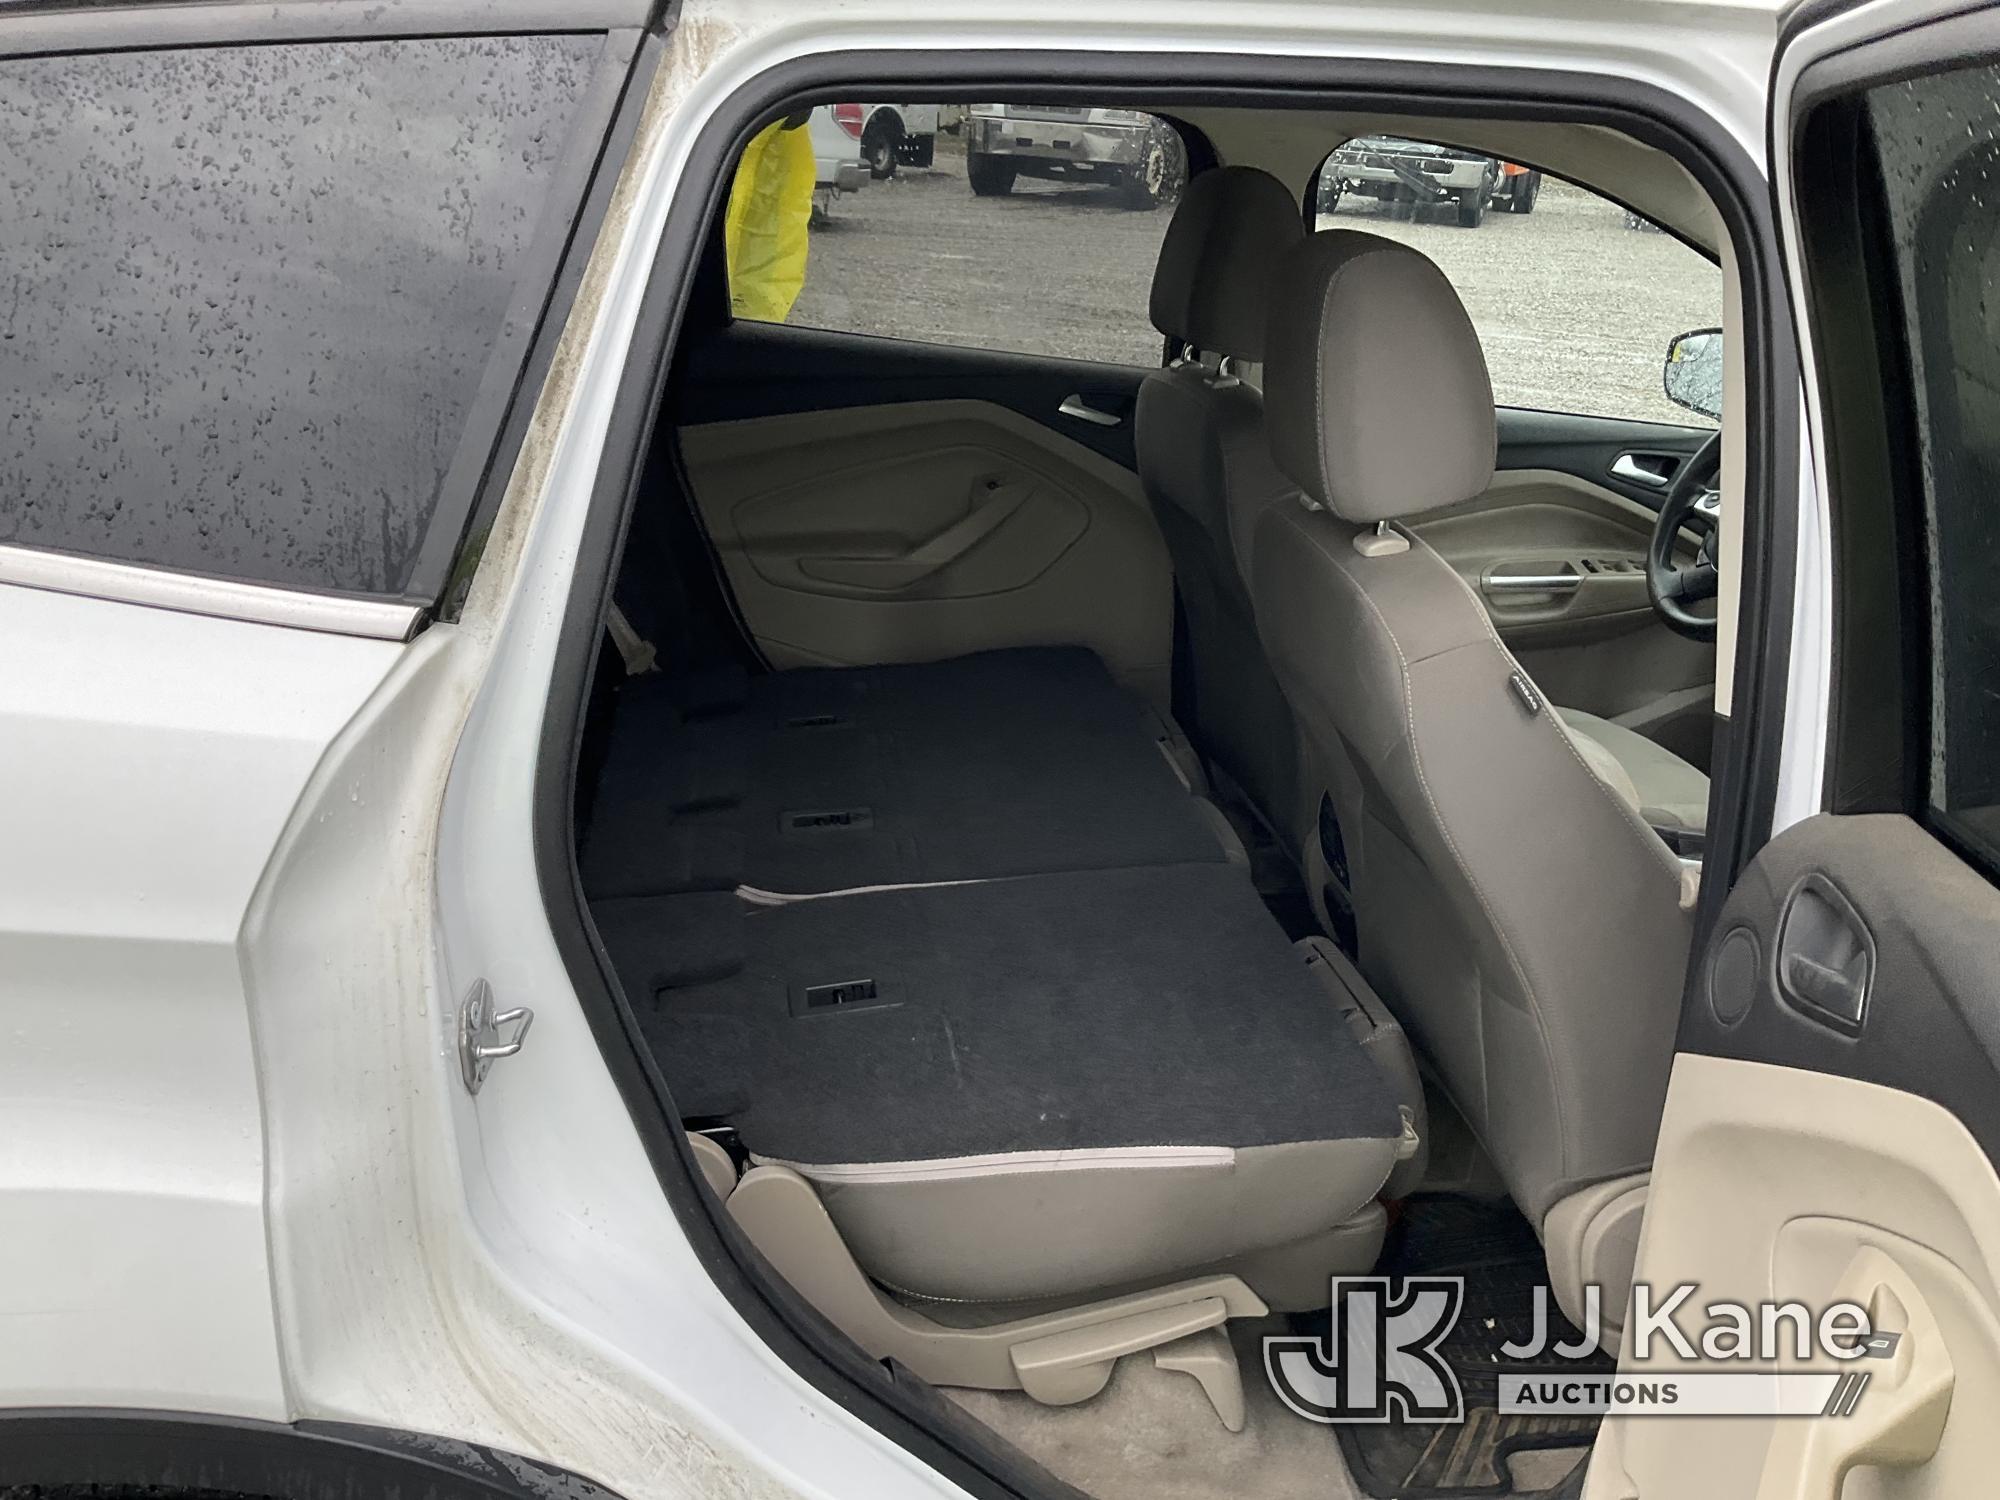 (Verona, KY) 2015 Ford Escape 4x4 4-Door Sport Utility Vehicle Not Running, Condition Unknown) (Bad